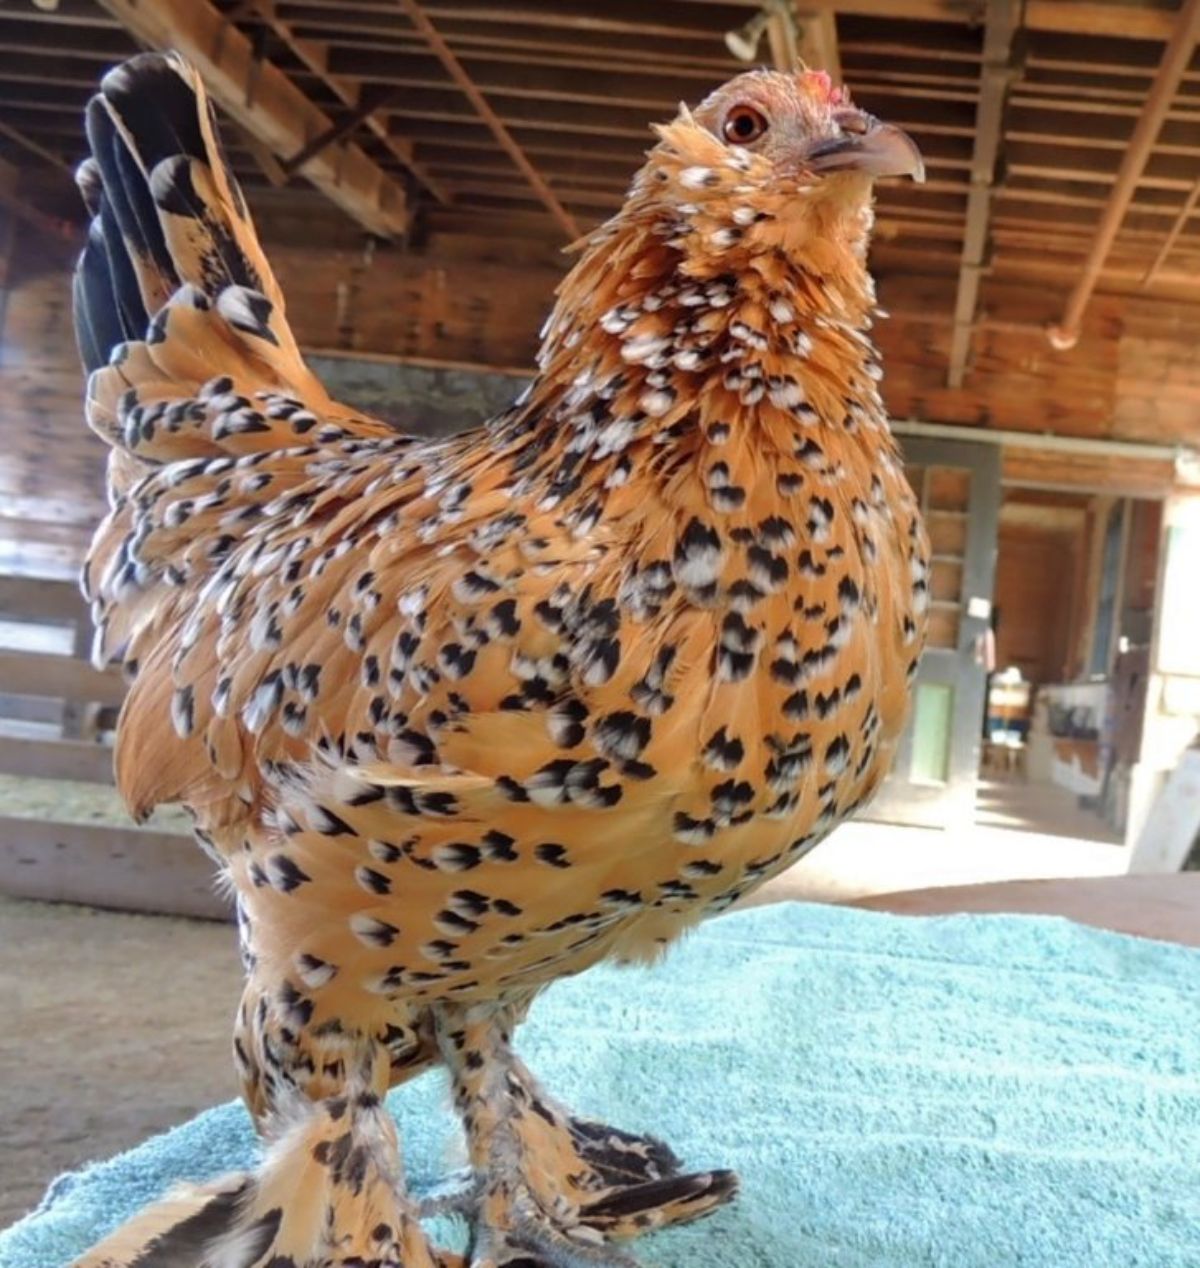 An adorable speckled Belgian Bearded d’Uccle hen in a chicken coop.